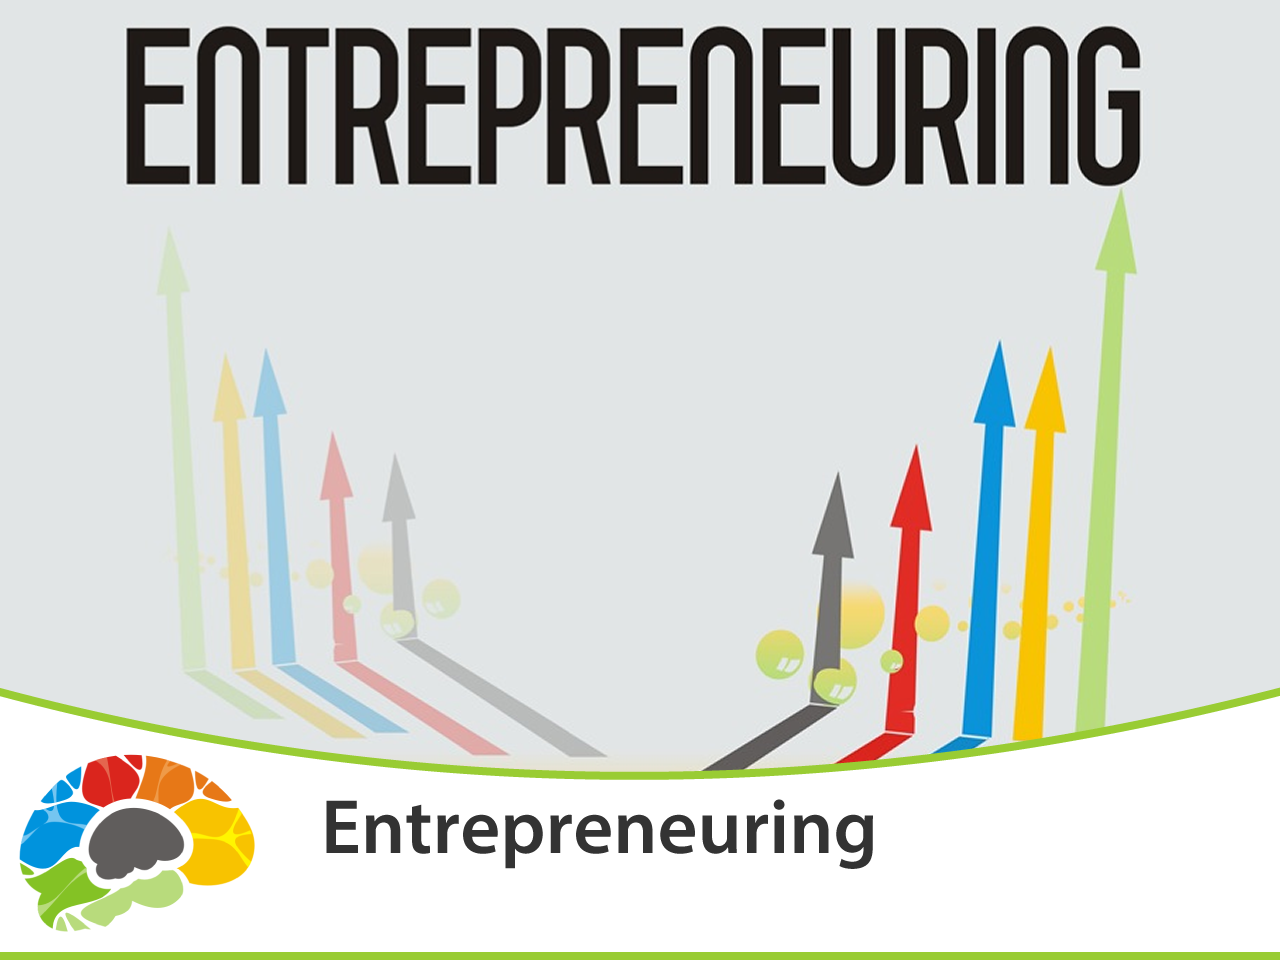 Entrepreneuring: Keys To Business Success + The Top 5 Marketing Mistakes, Singapore elarning online course